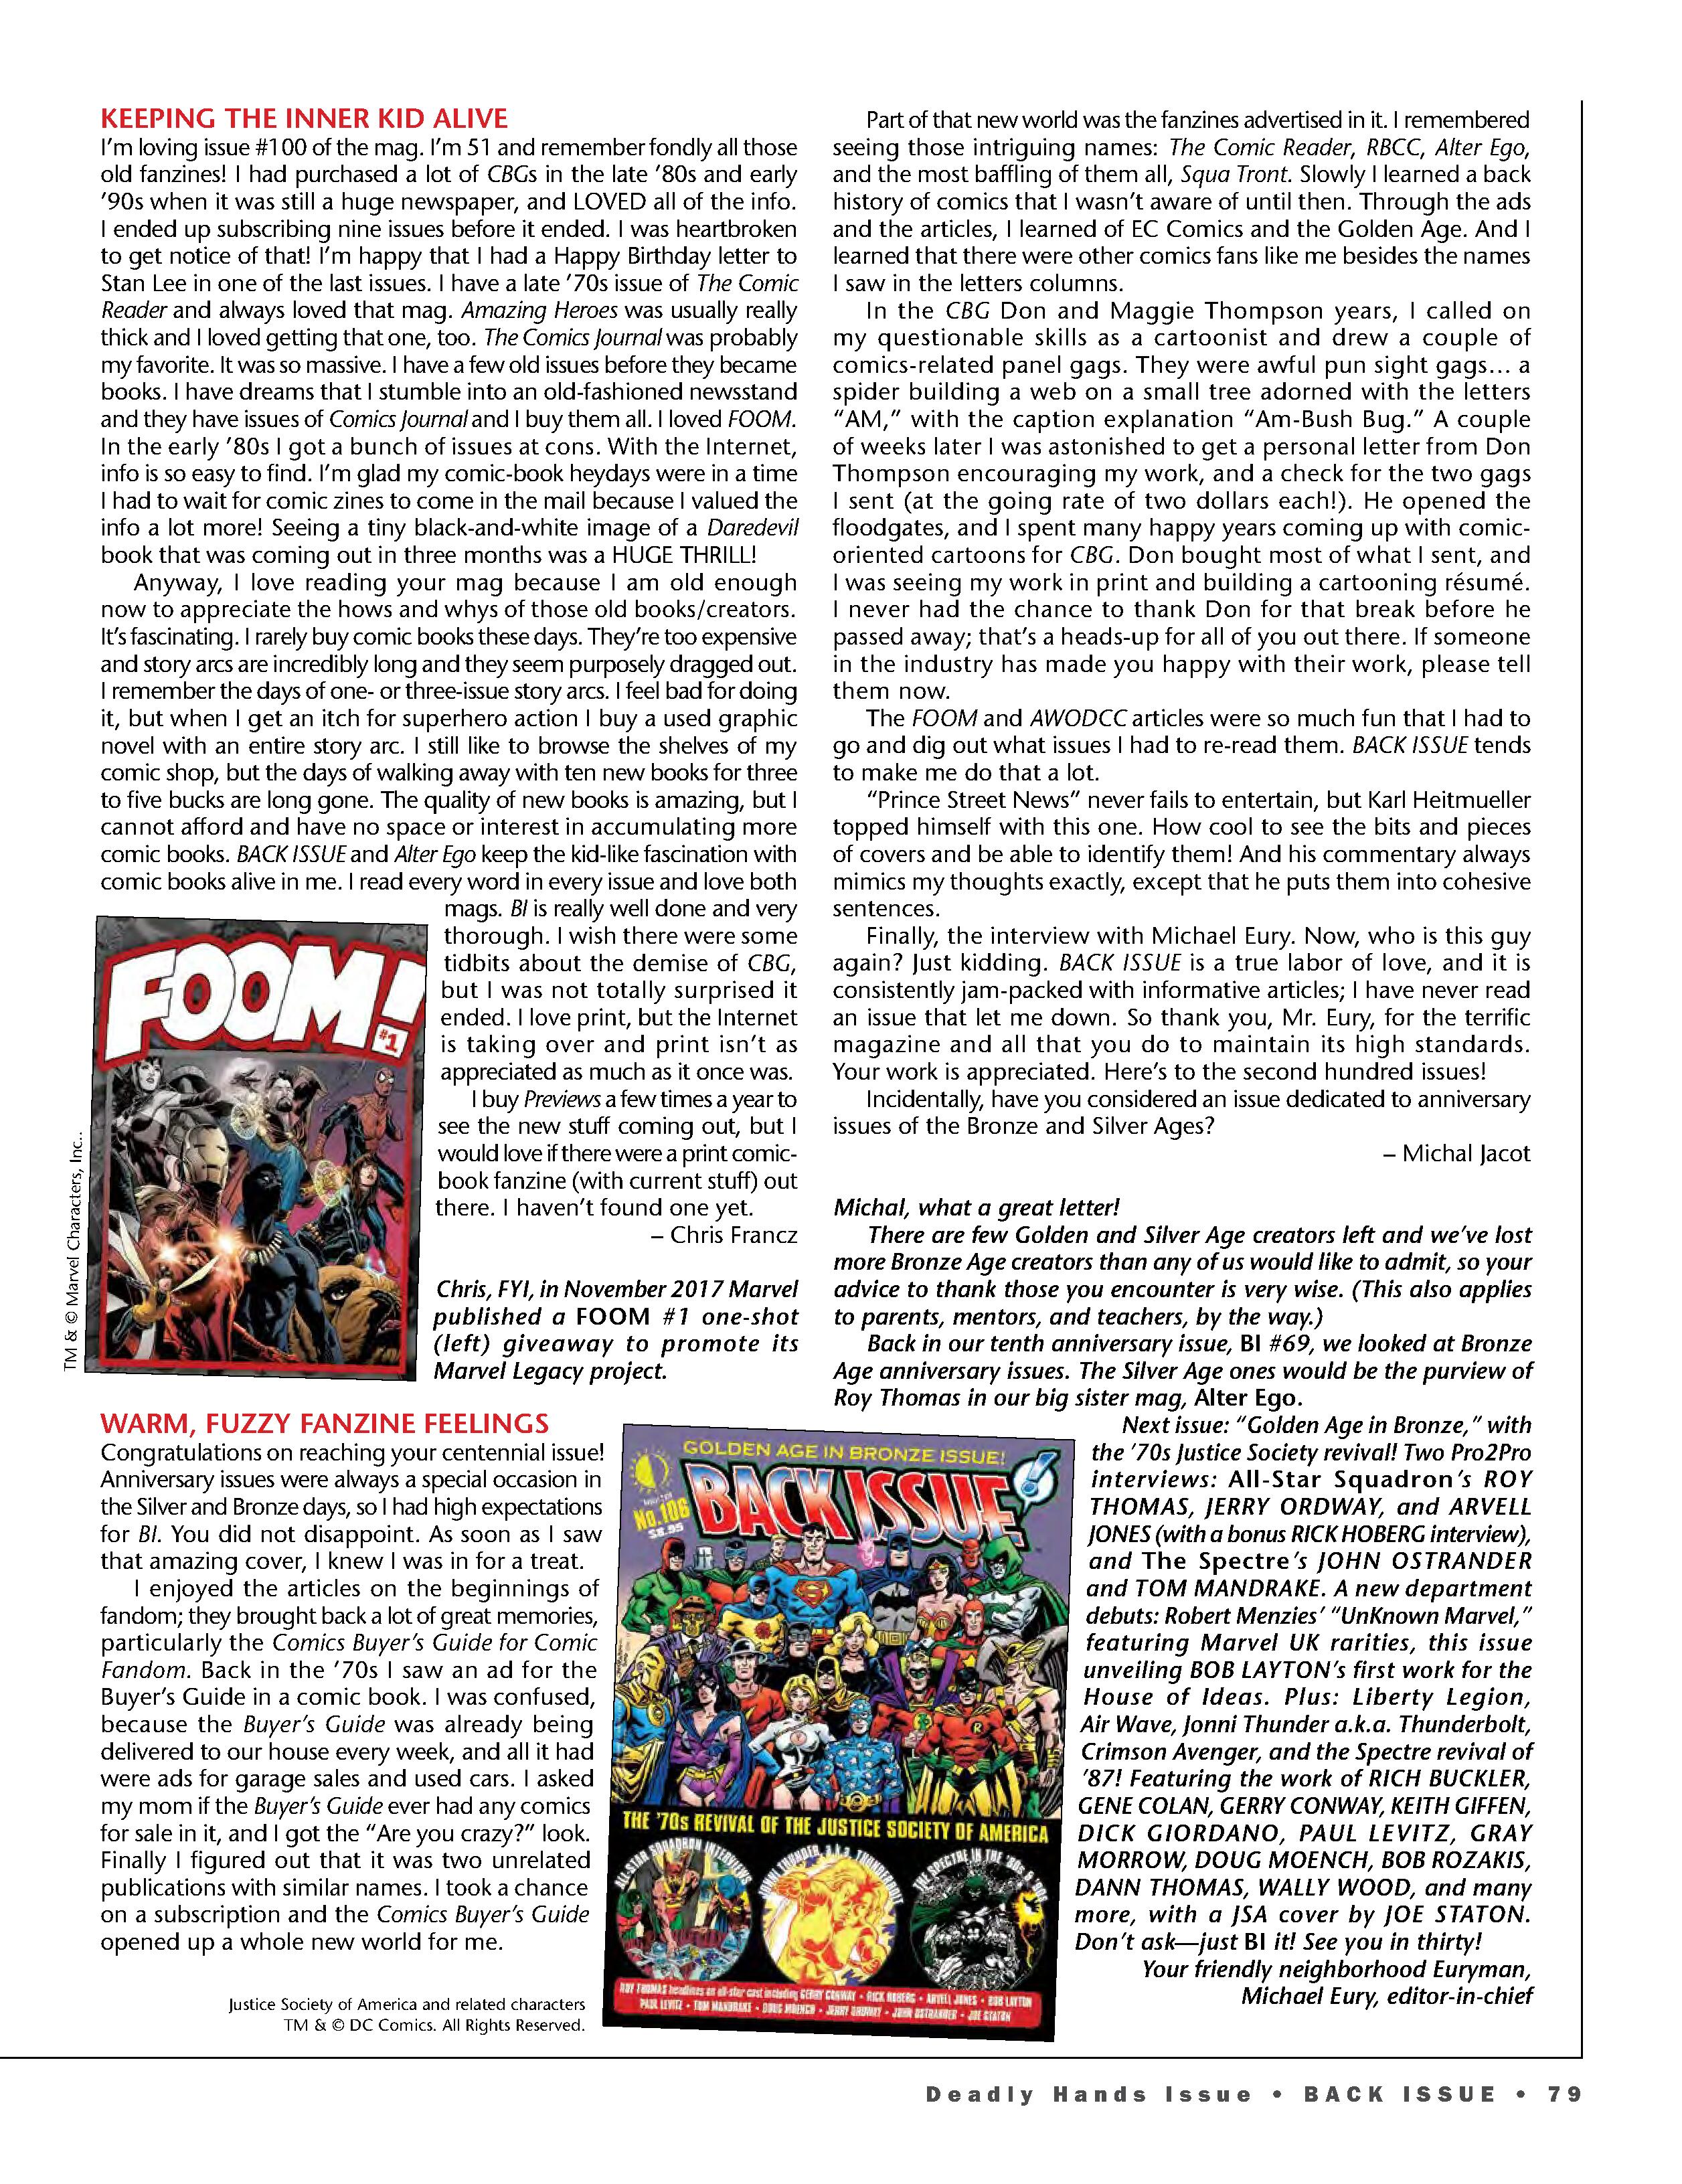 Read online Back Issue comic -  Issue #105 - 81